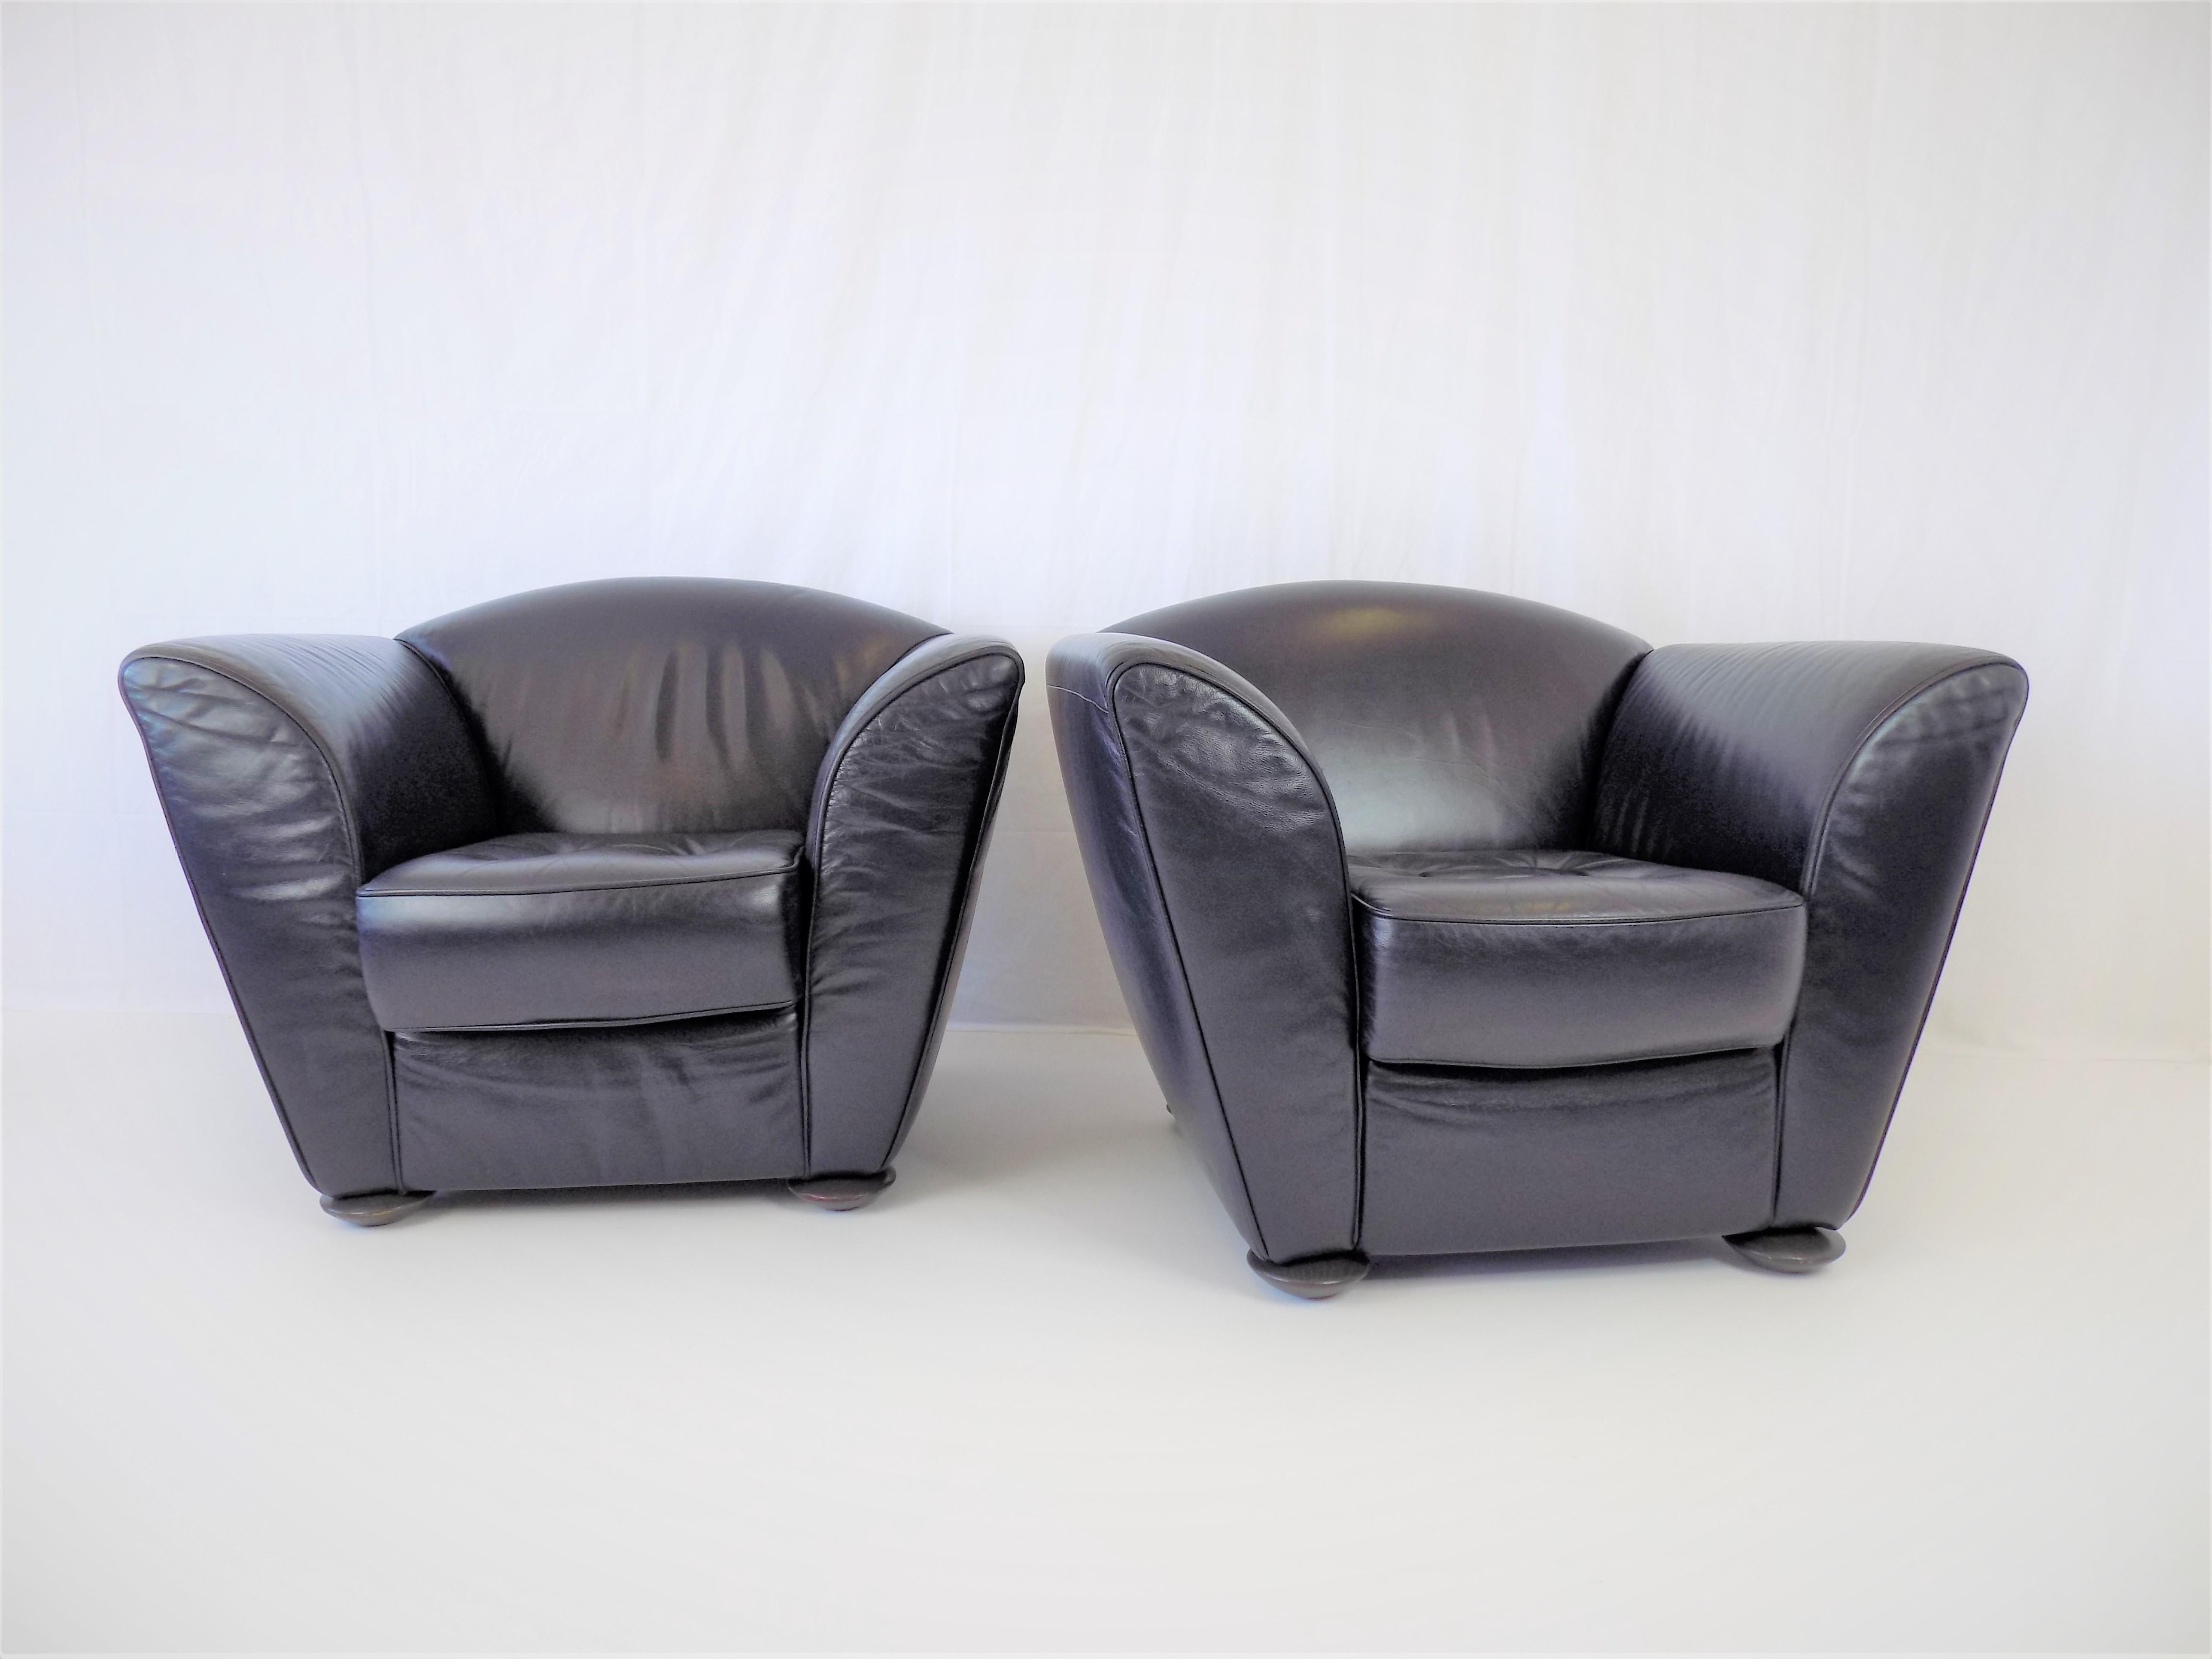 Cor Zelda Set of 2 Leather Armchairs By Peter Maly, Germany, 1980 For Sale 4